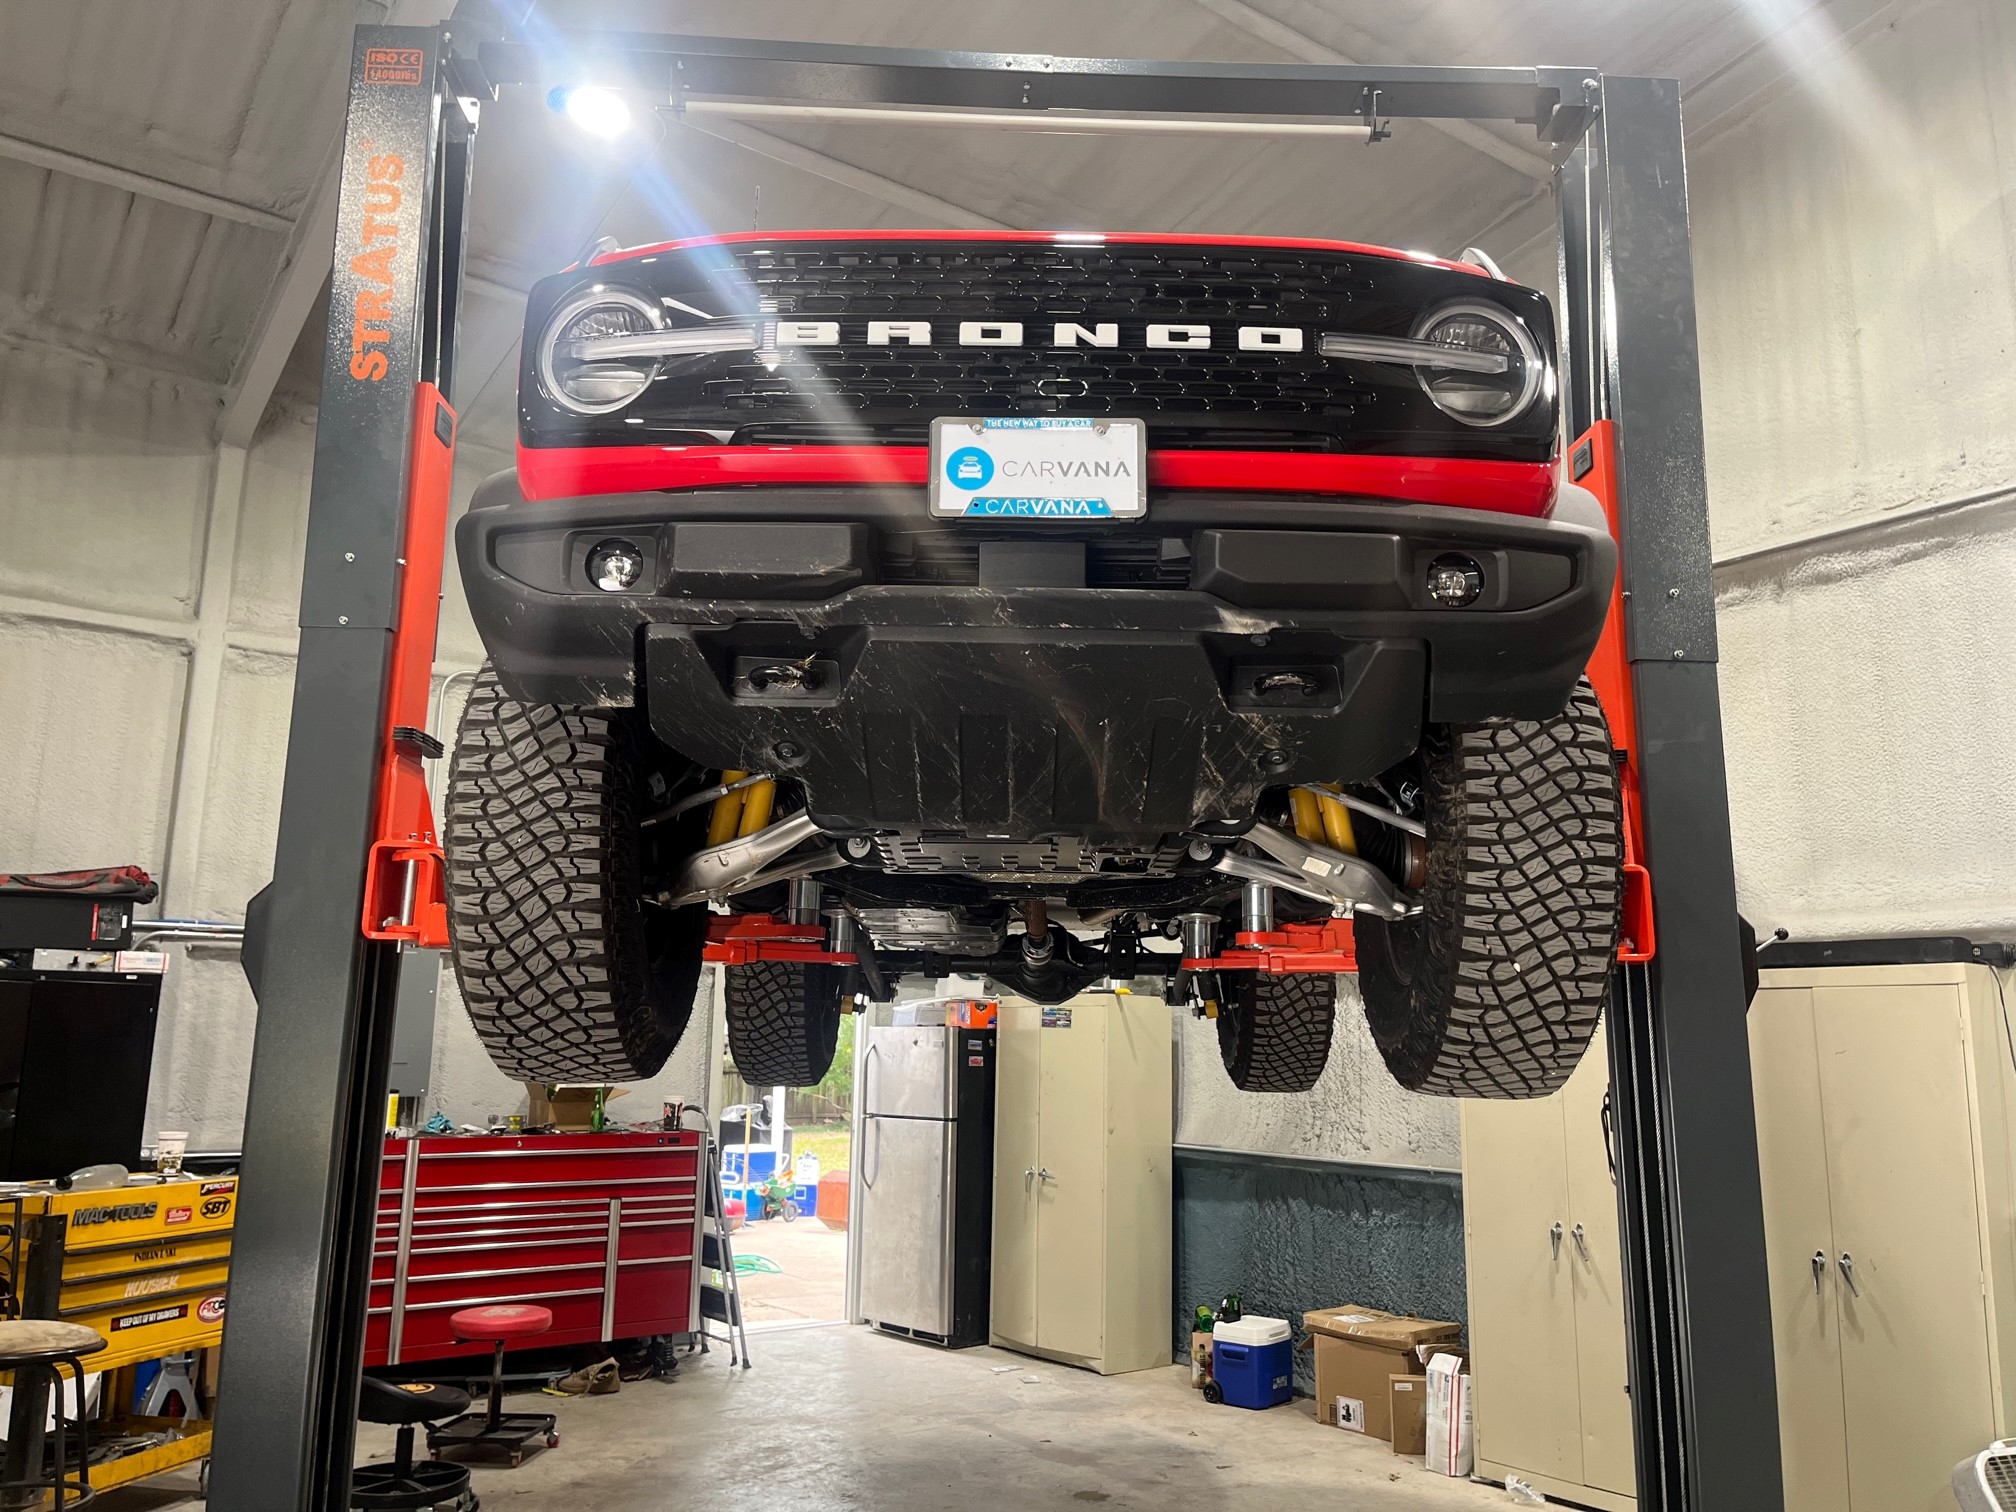 Ford Bronco 2 Door Race red Wildtrak build.  Custom FAB and CNC machining! On lift